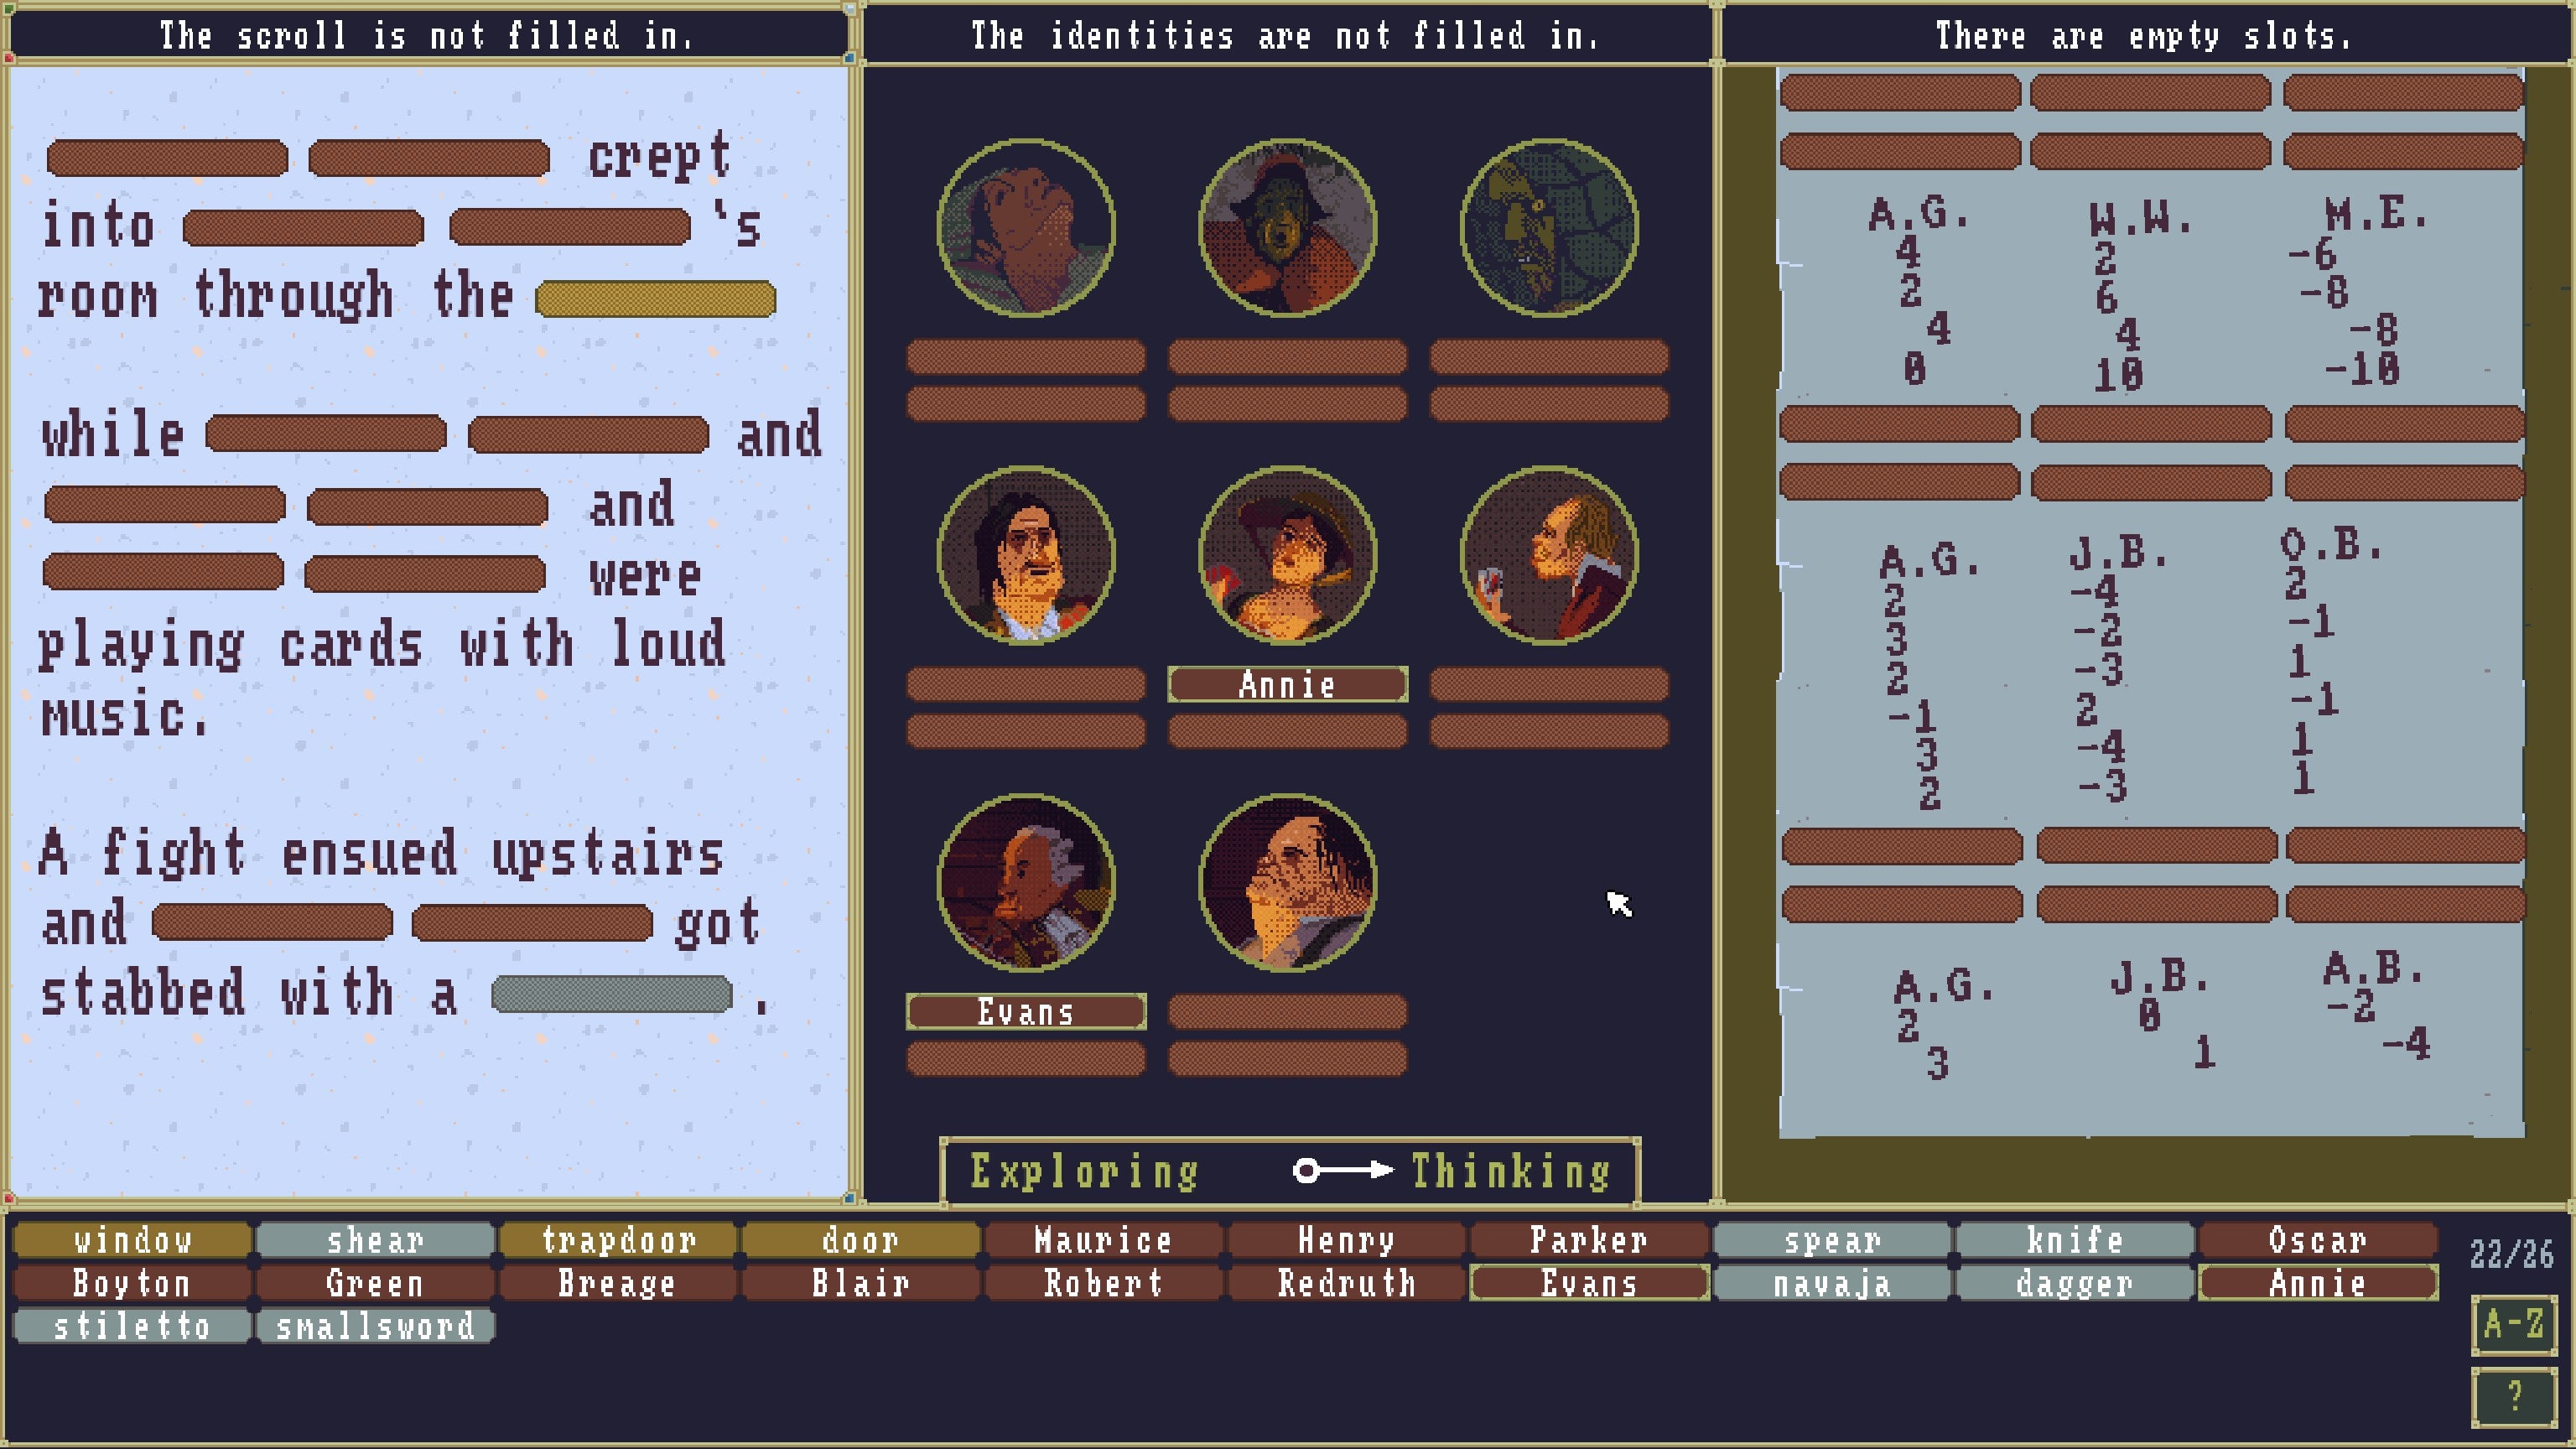 The screen is divided into three segments, with text, character portraits and a card game sheet needing to be filled out by the player in The Case Of The Golden Idol